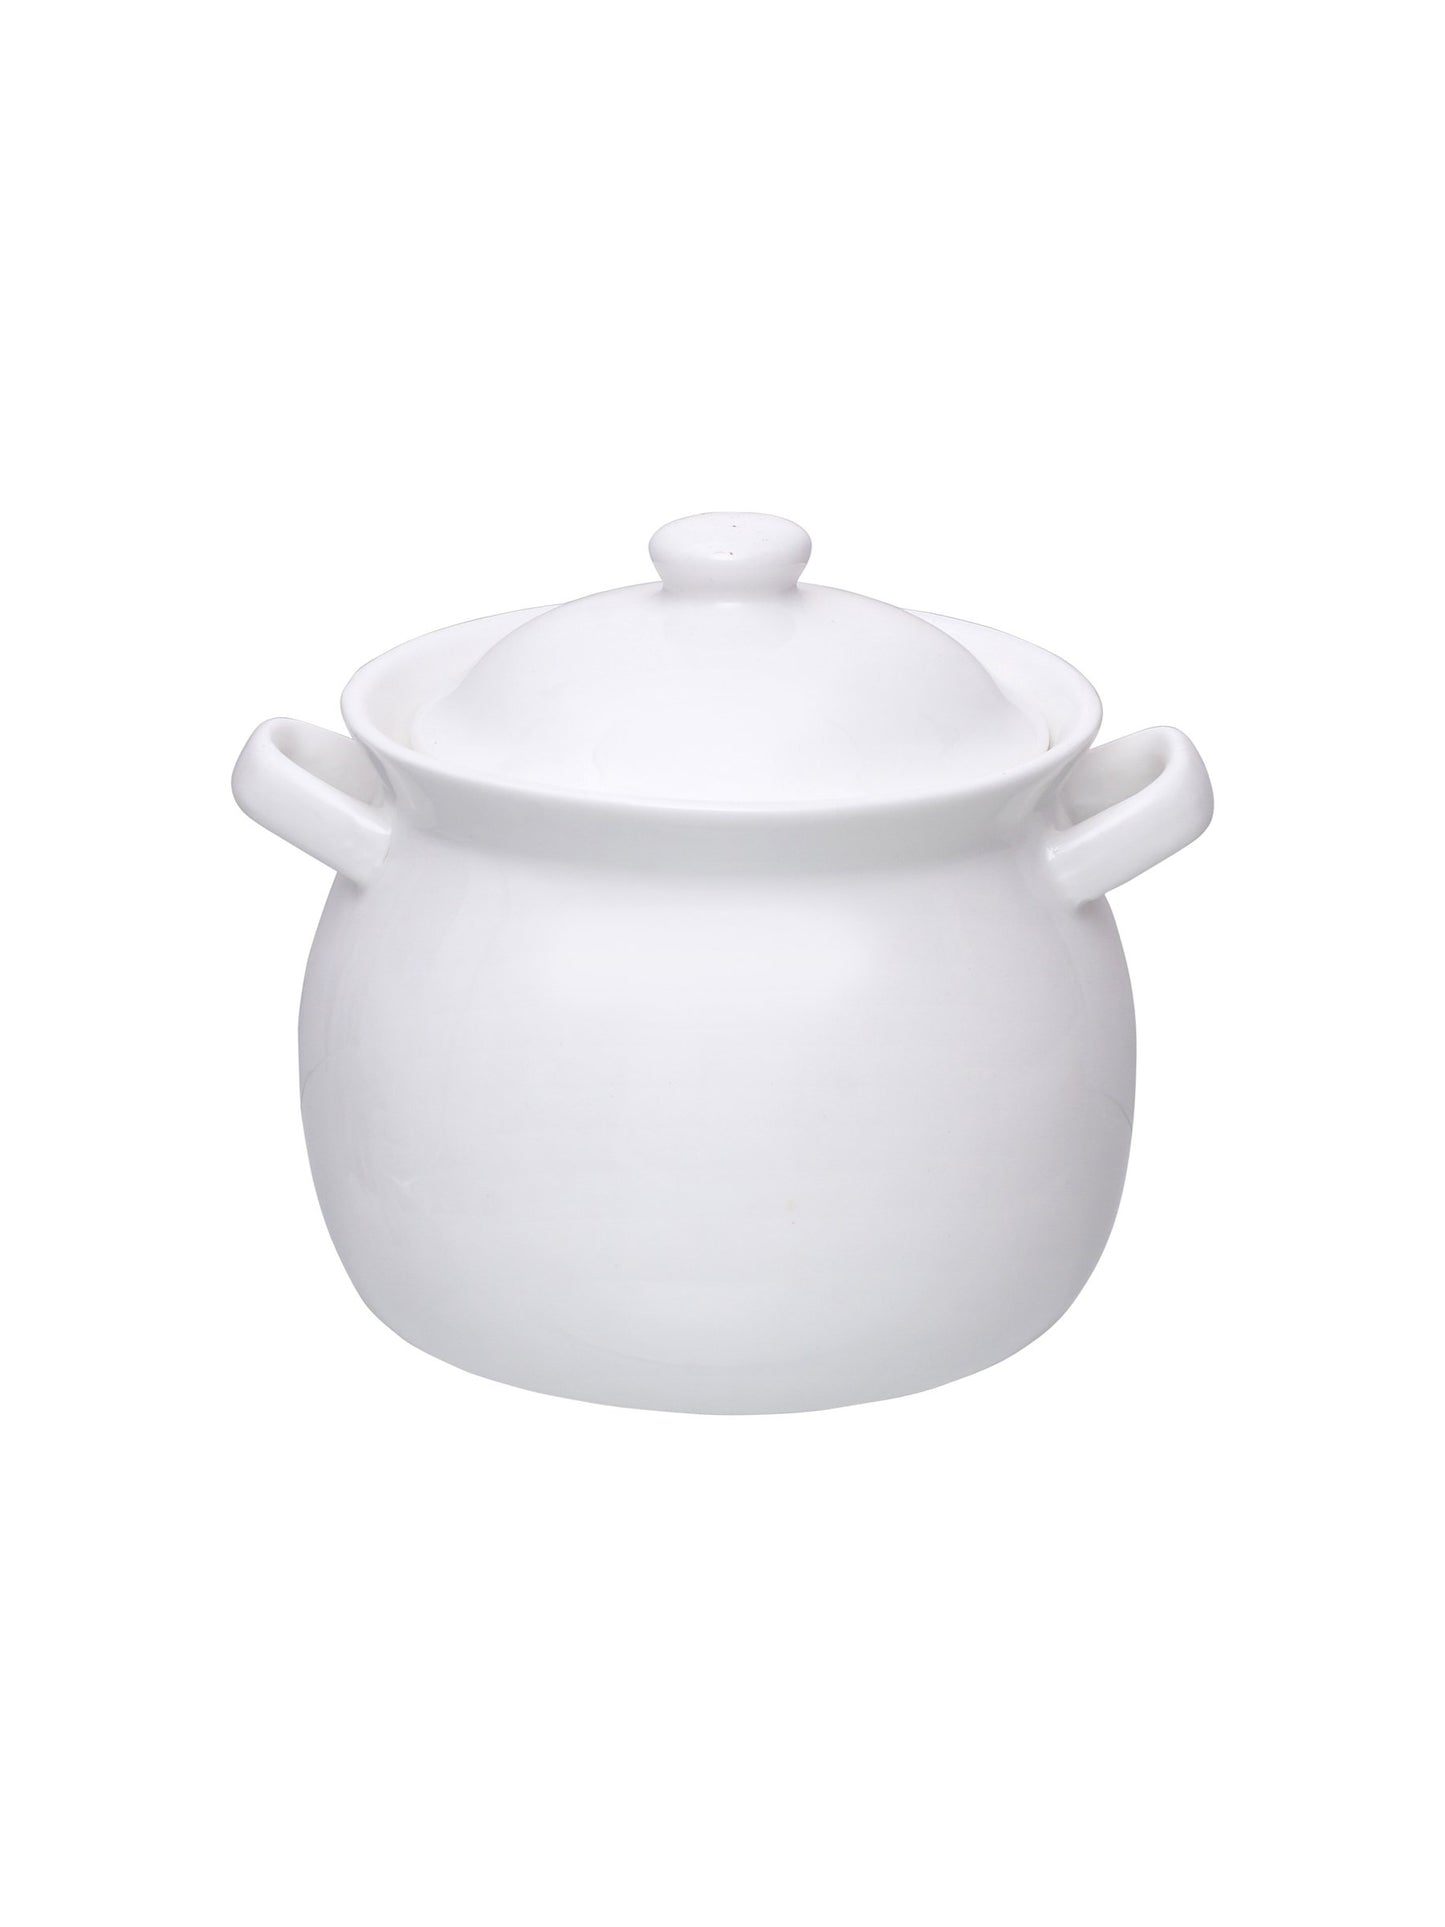 Clay Craft Basic Bowl Pot Belly 2 Piece Small & Big Plain White - Clay Craft India